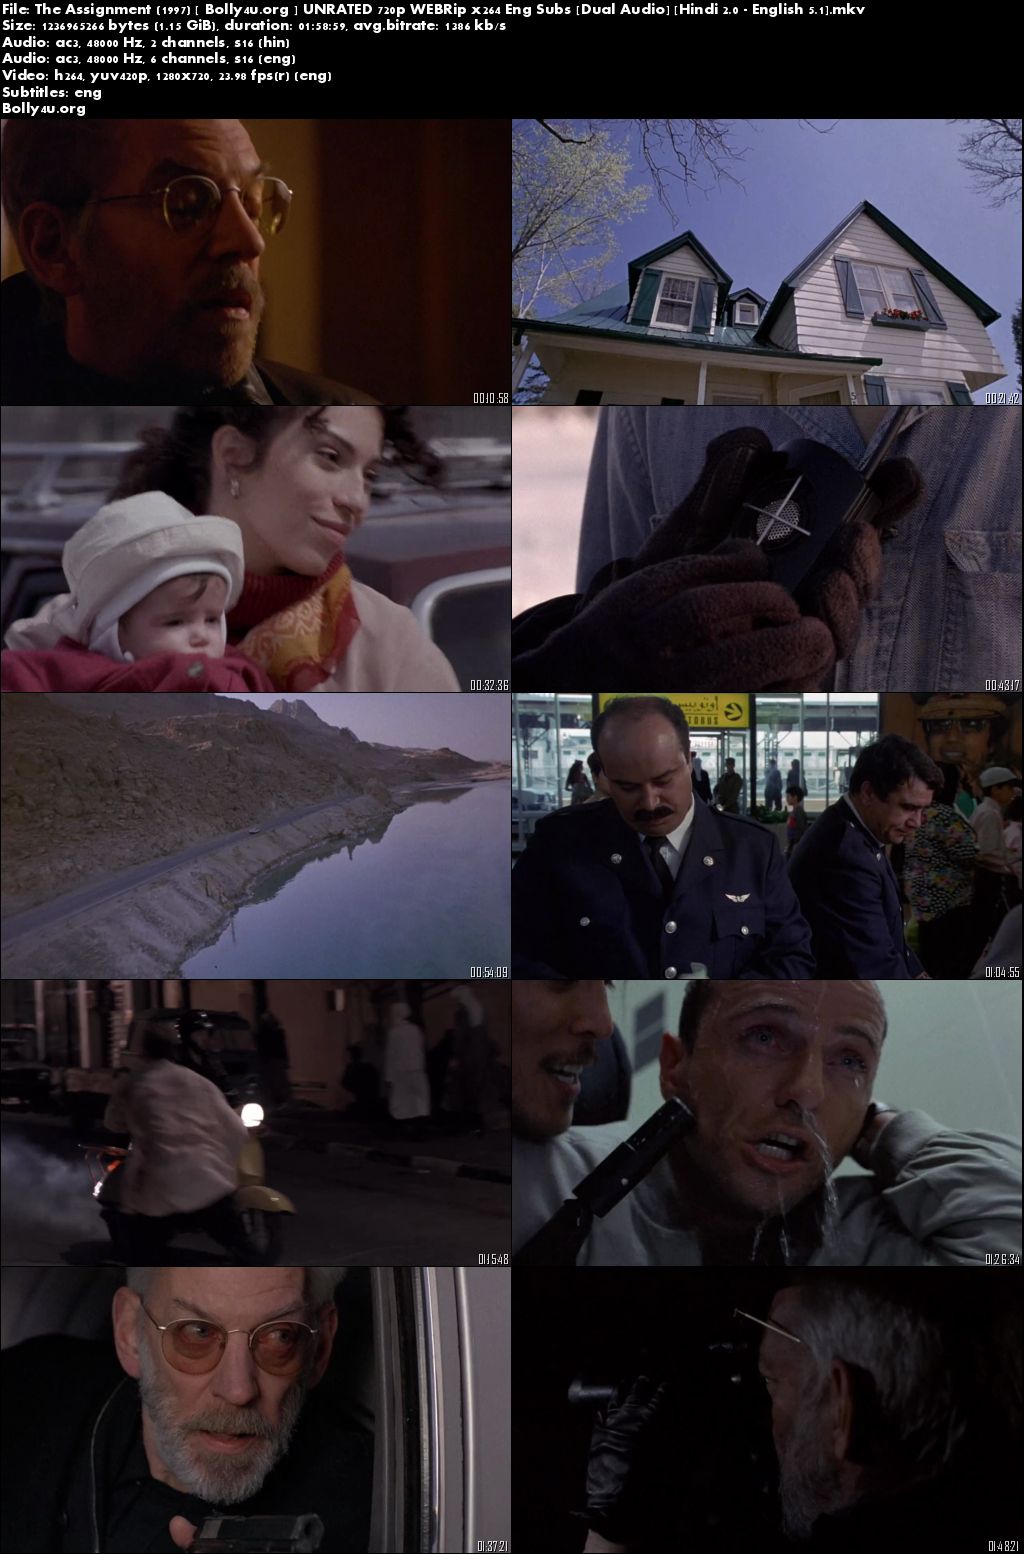 The Assignment 1997 WEBRip Hindi 350MB UNRATED Dual Audio 480p ESub Download